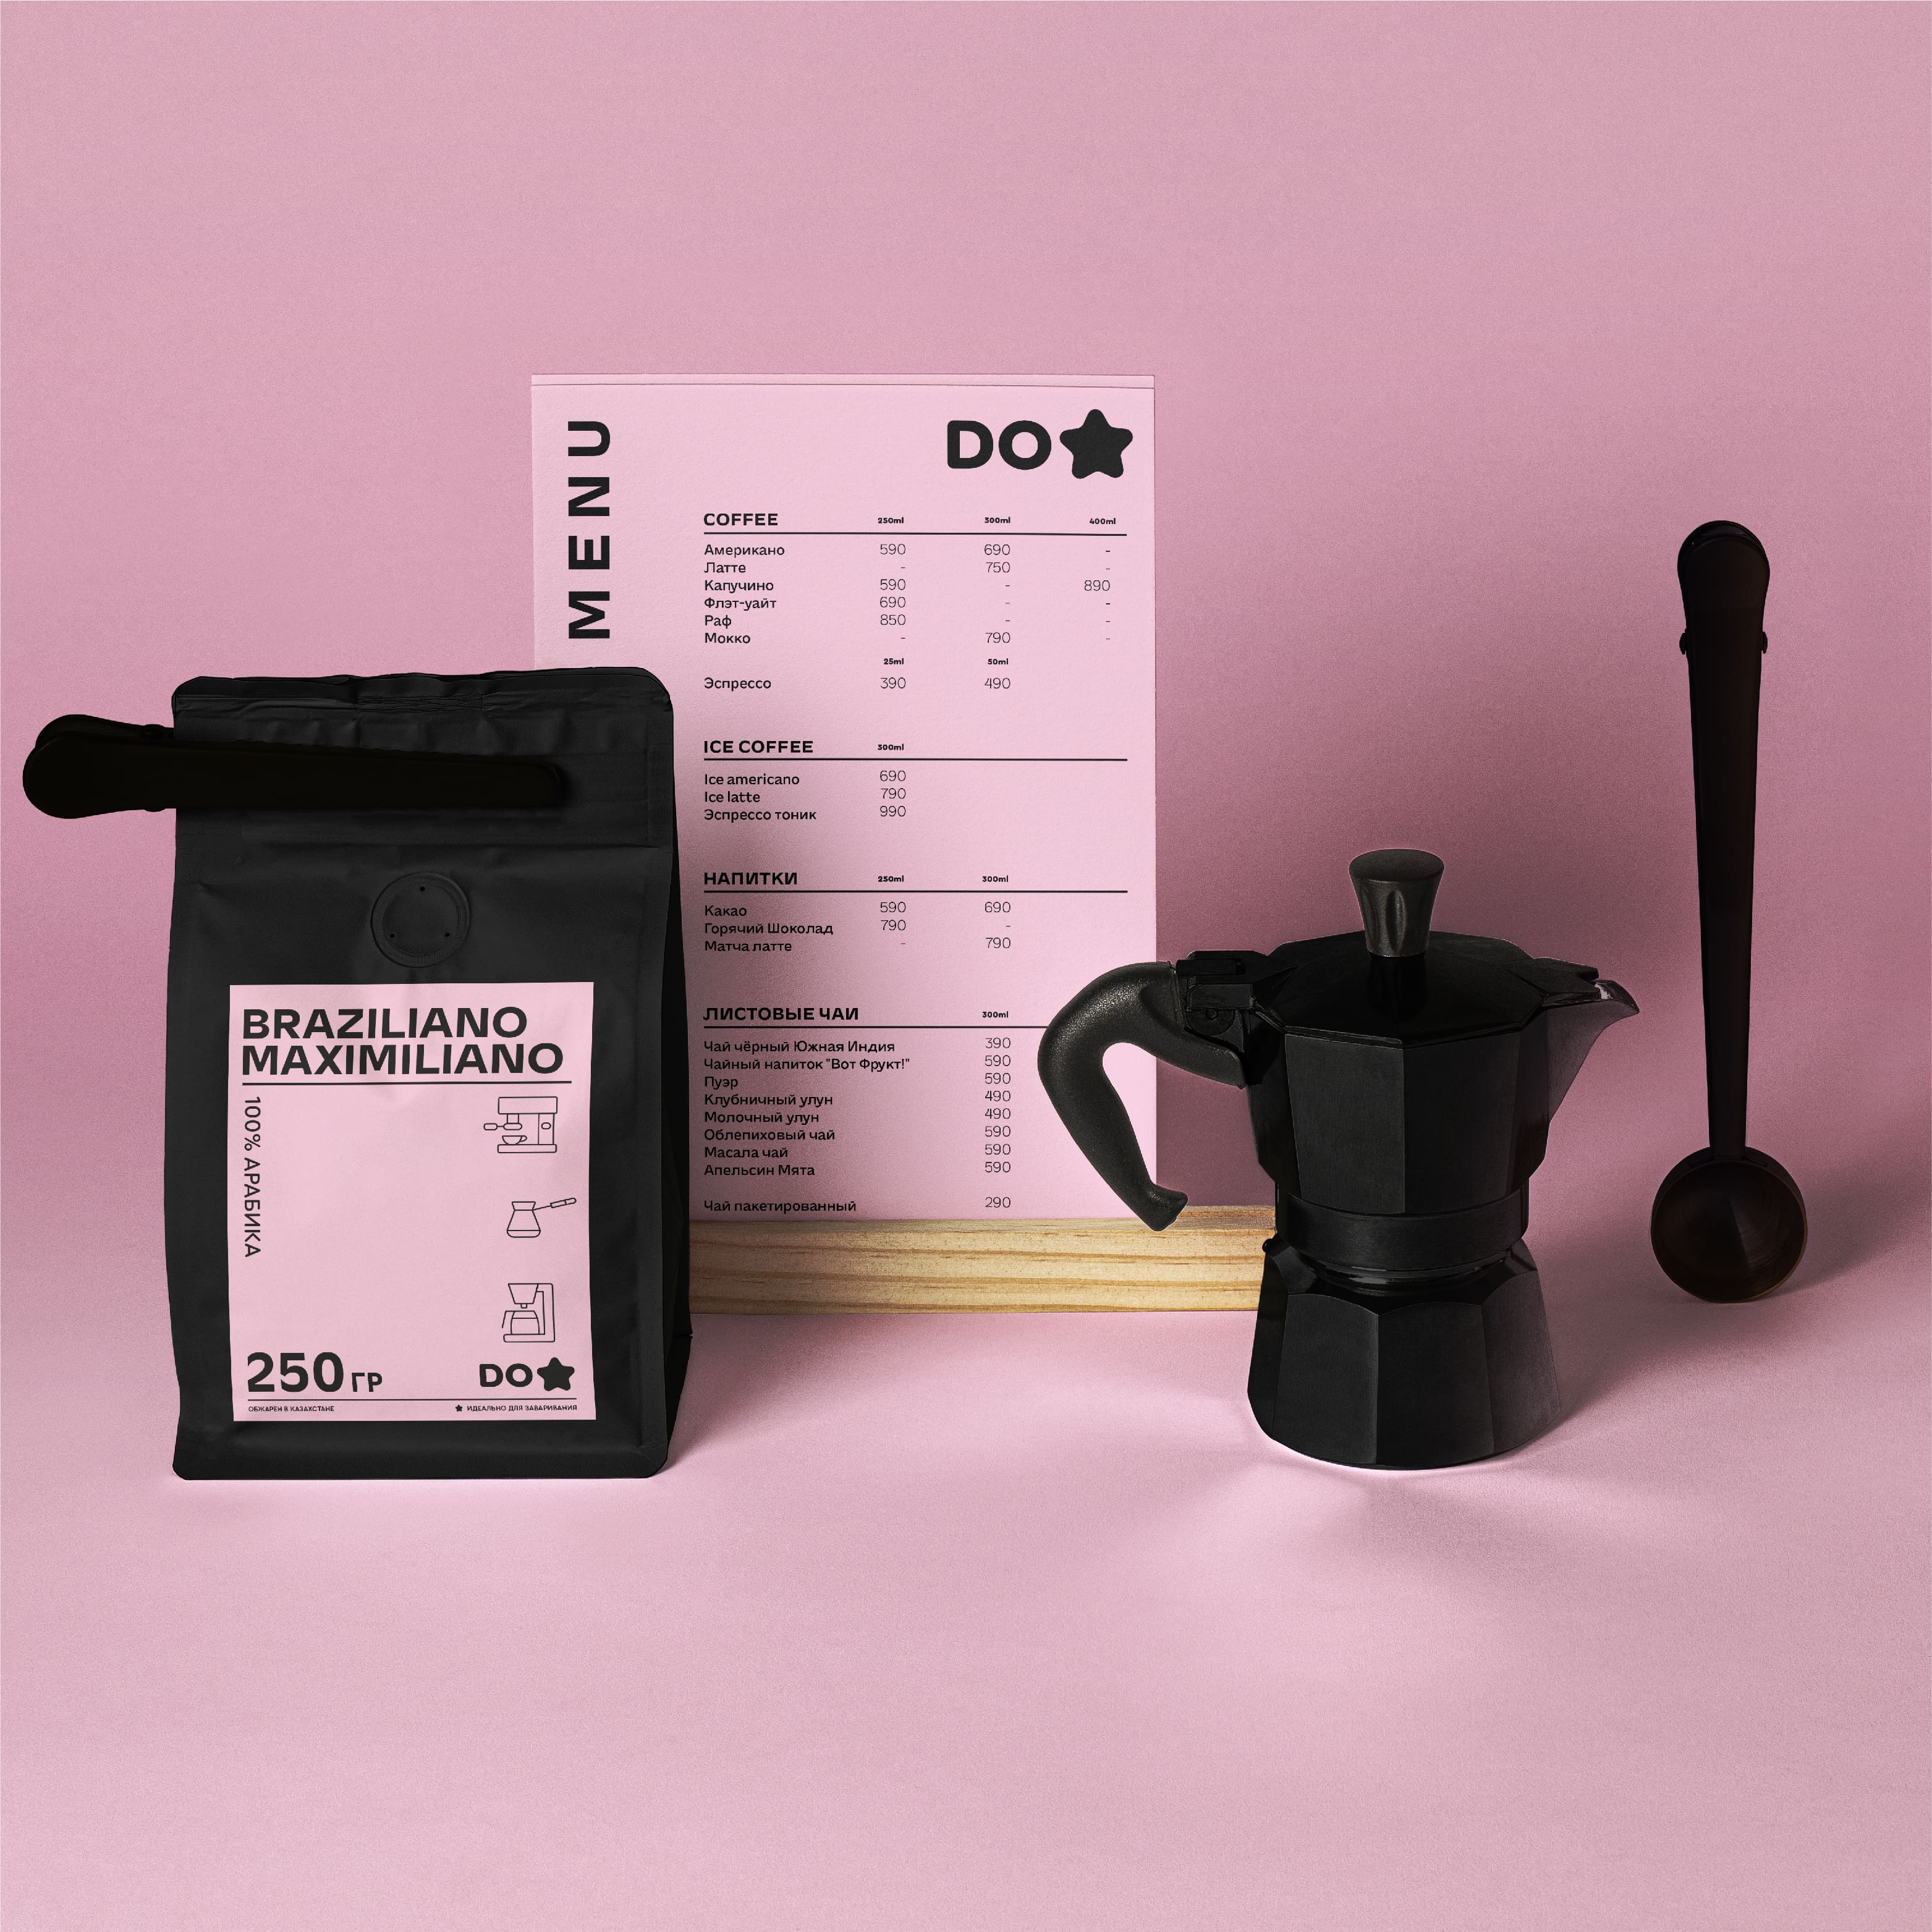 Brand Identity for Do* Boutique Coffee Shop by Dimasso